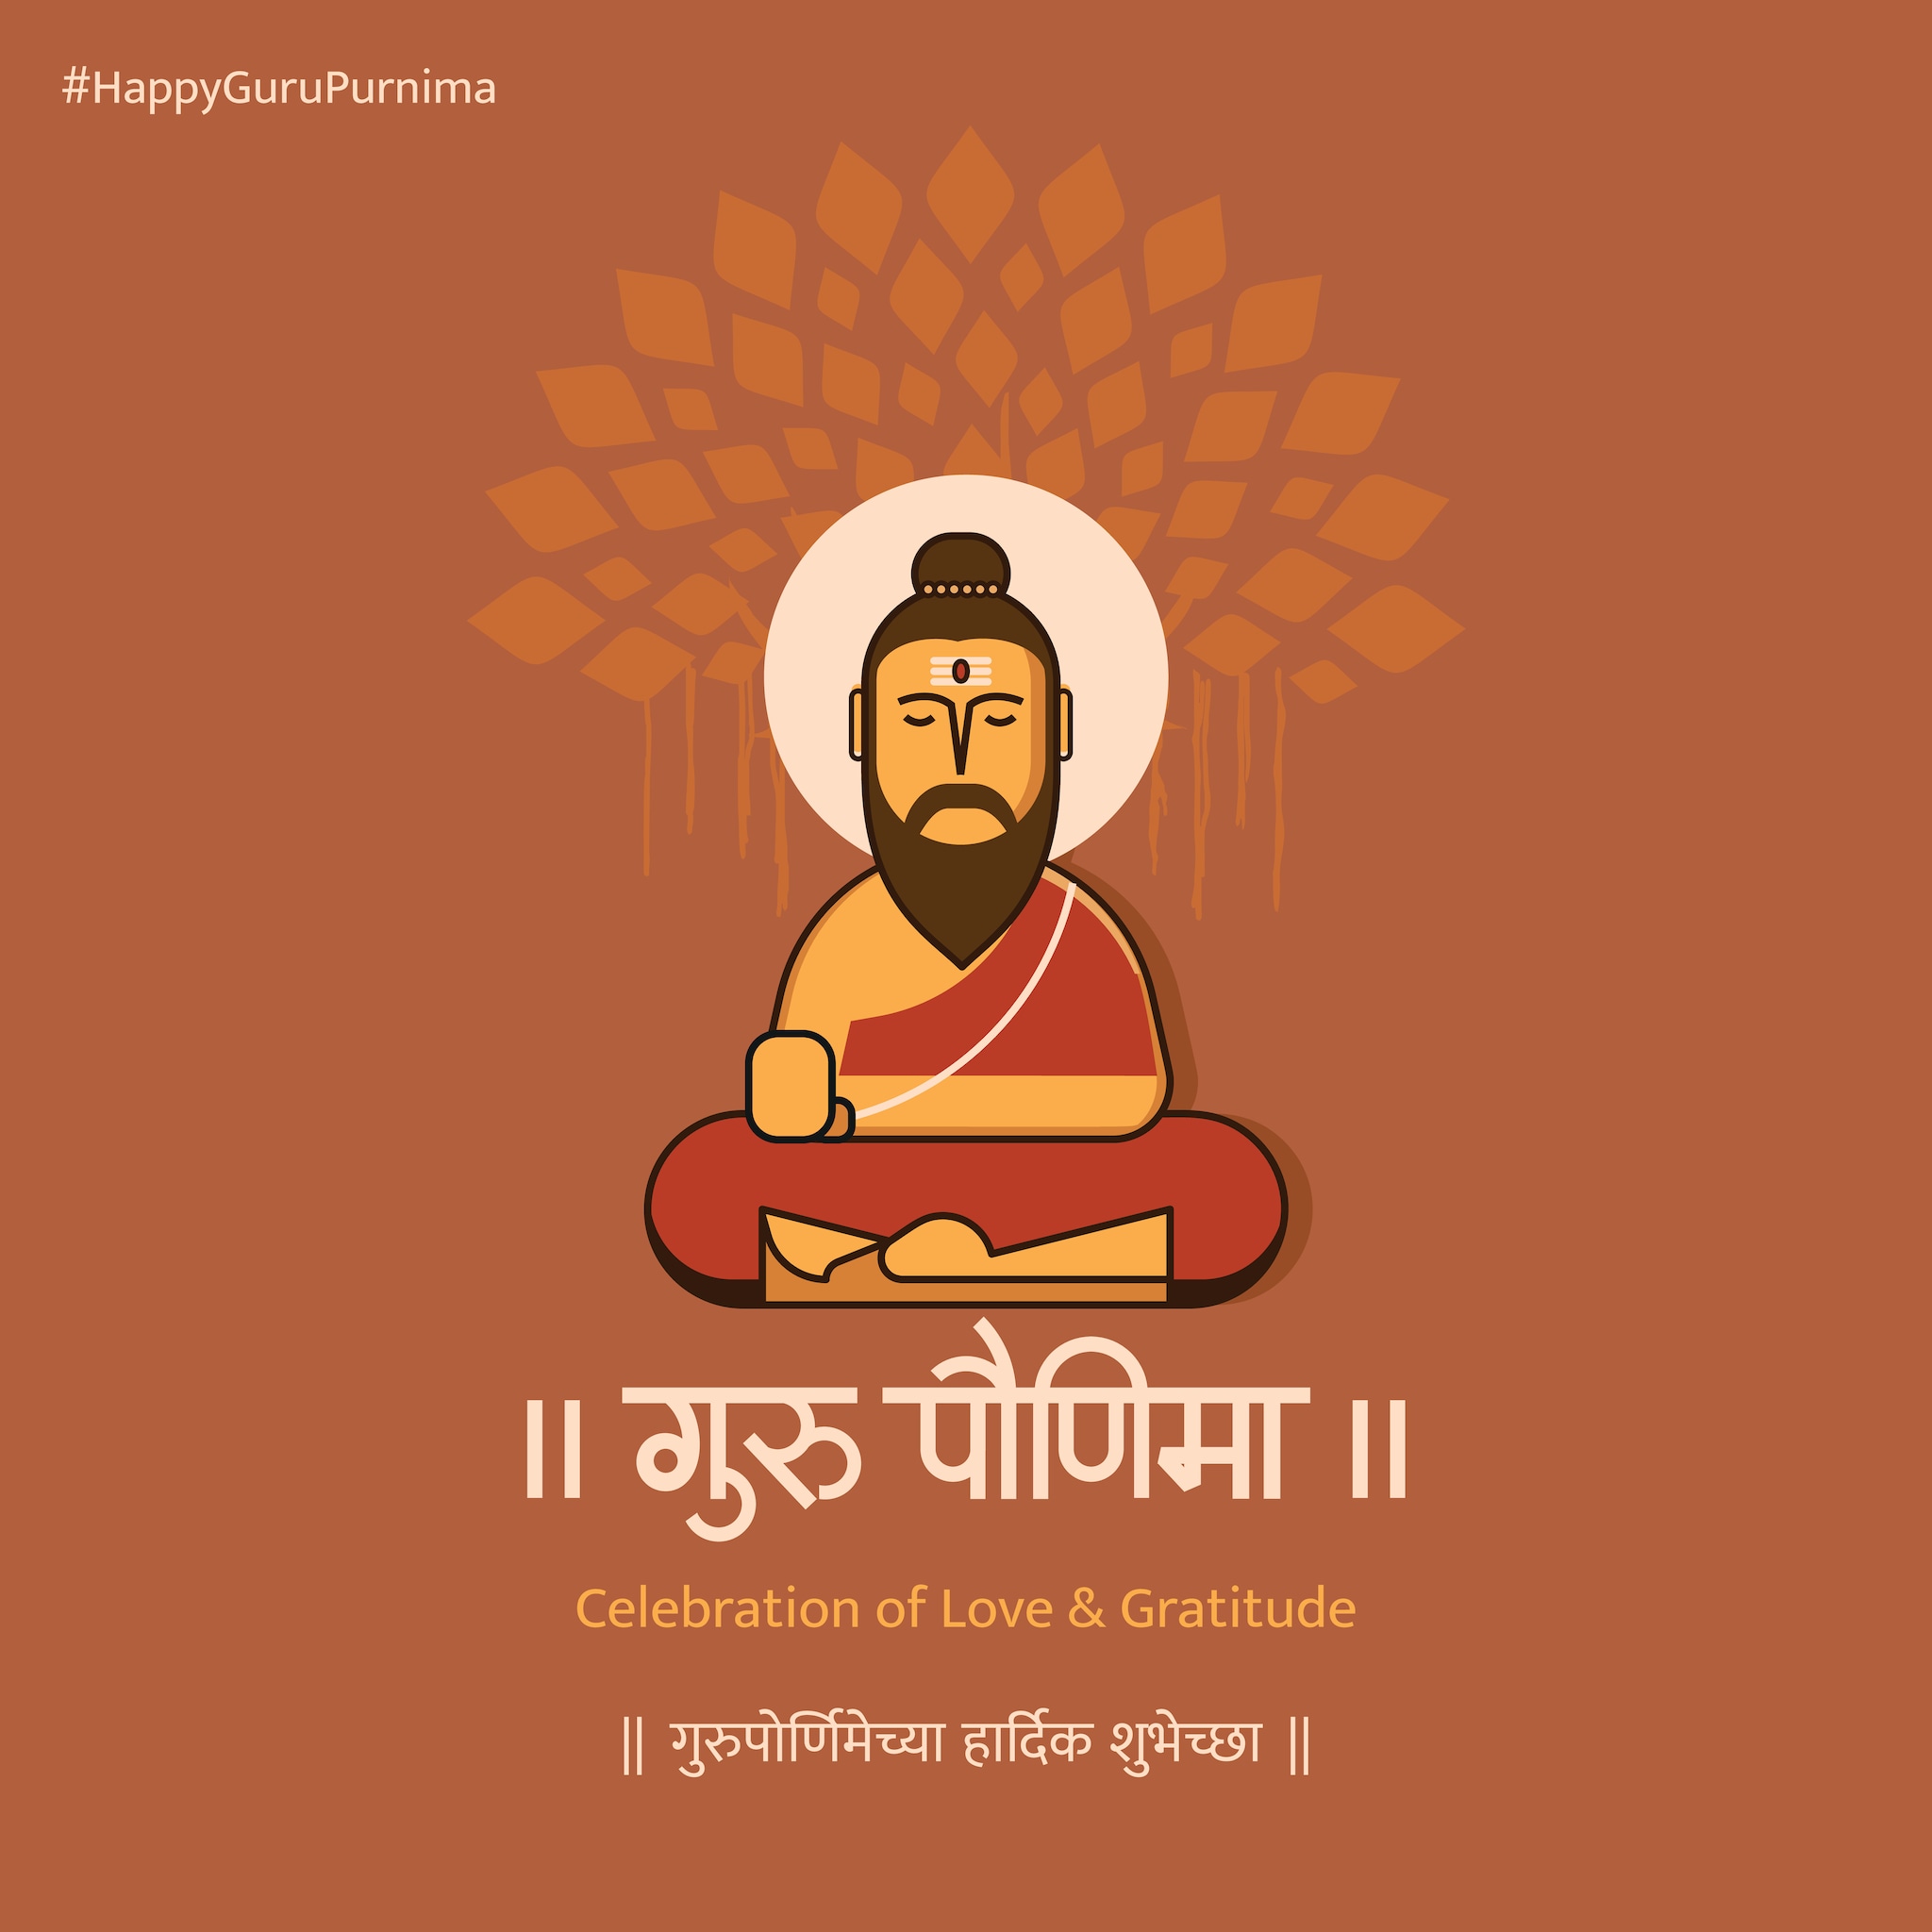 Happy Guru Purnima 2022 Wishes, Greetings, Whatsapp Status, Images And Quotes You Can Share With Your Dear Ones. (Image: Shutterstock) 